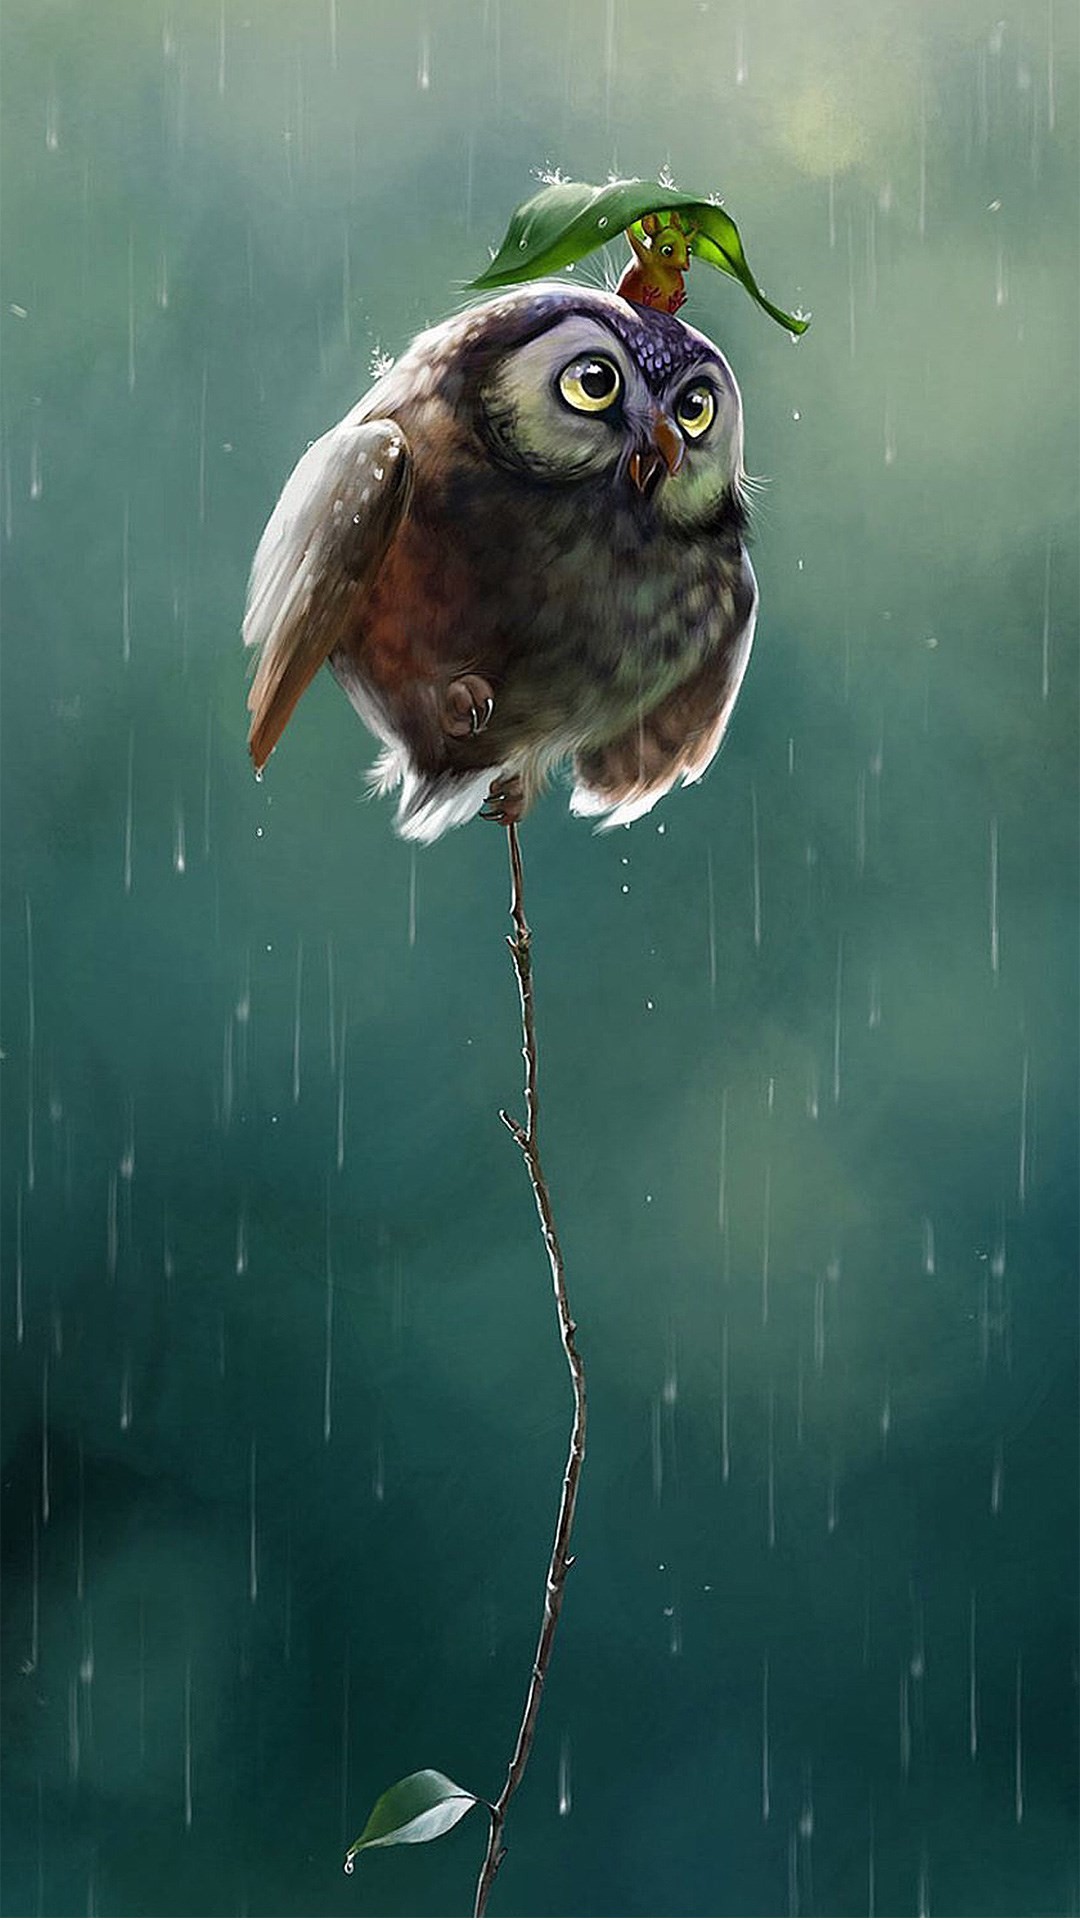 1080x1920 Cute Owl Flying High Rainy Day Covering Leaf iPhone 6 wallpaper